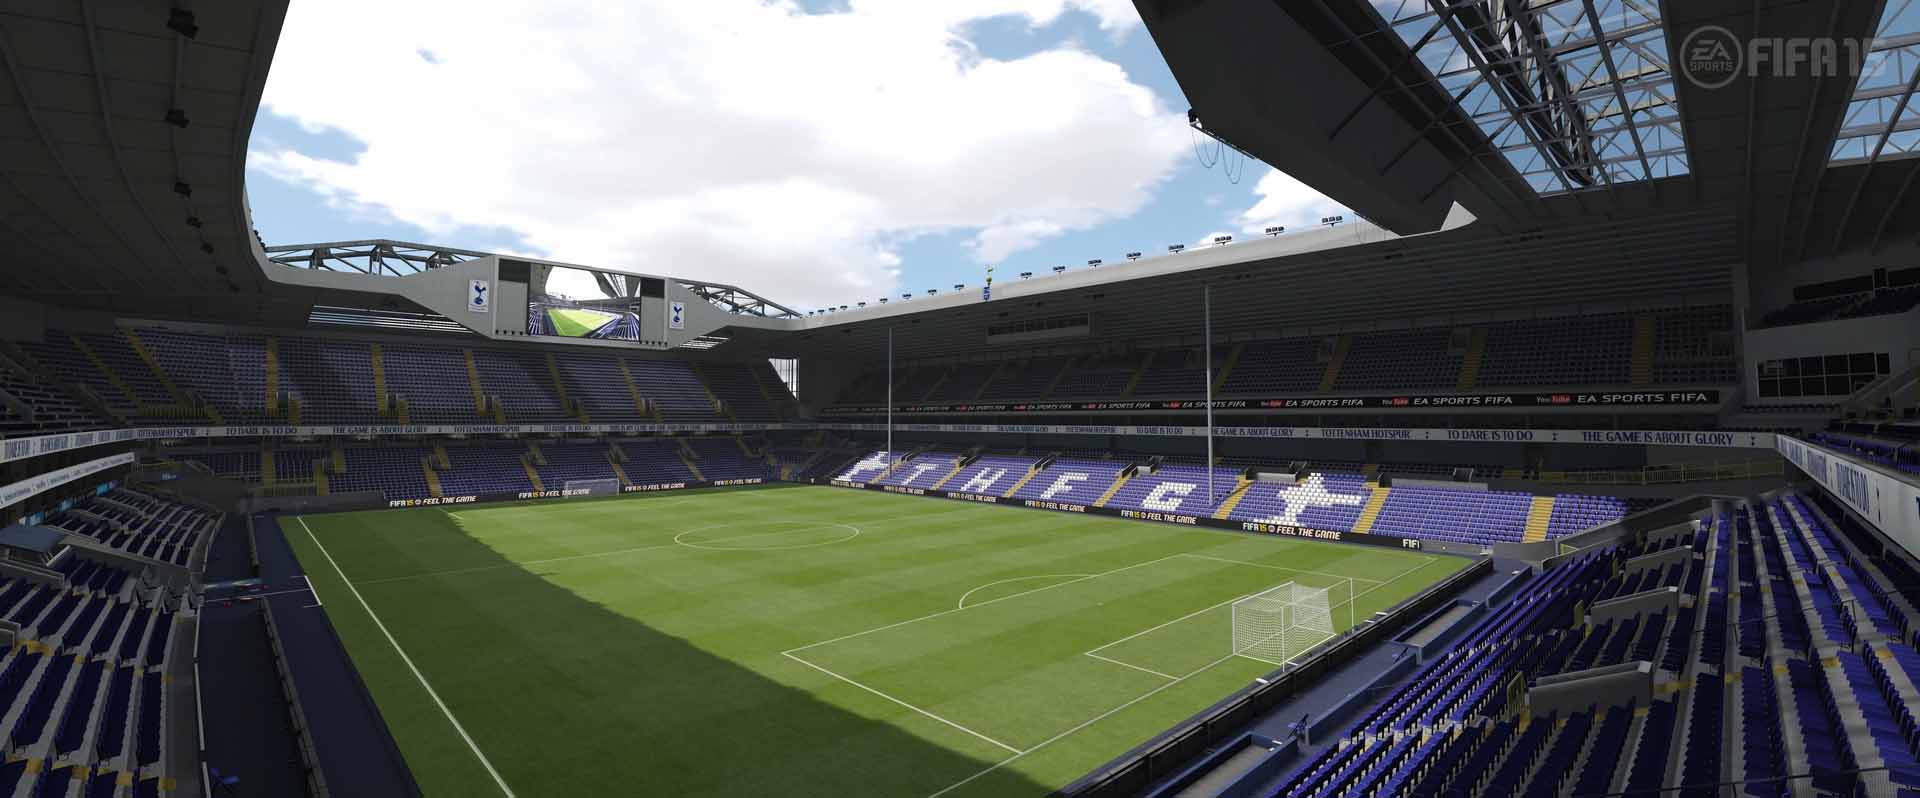 FIFA 15 will include all the 20 BPL Stadiums